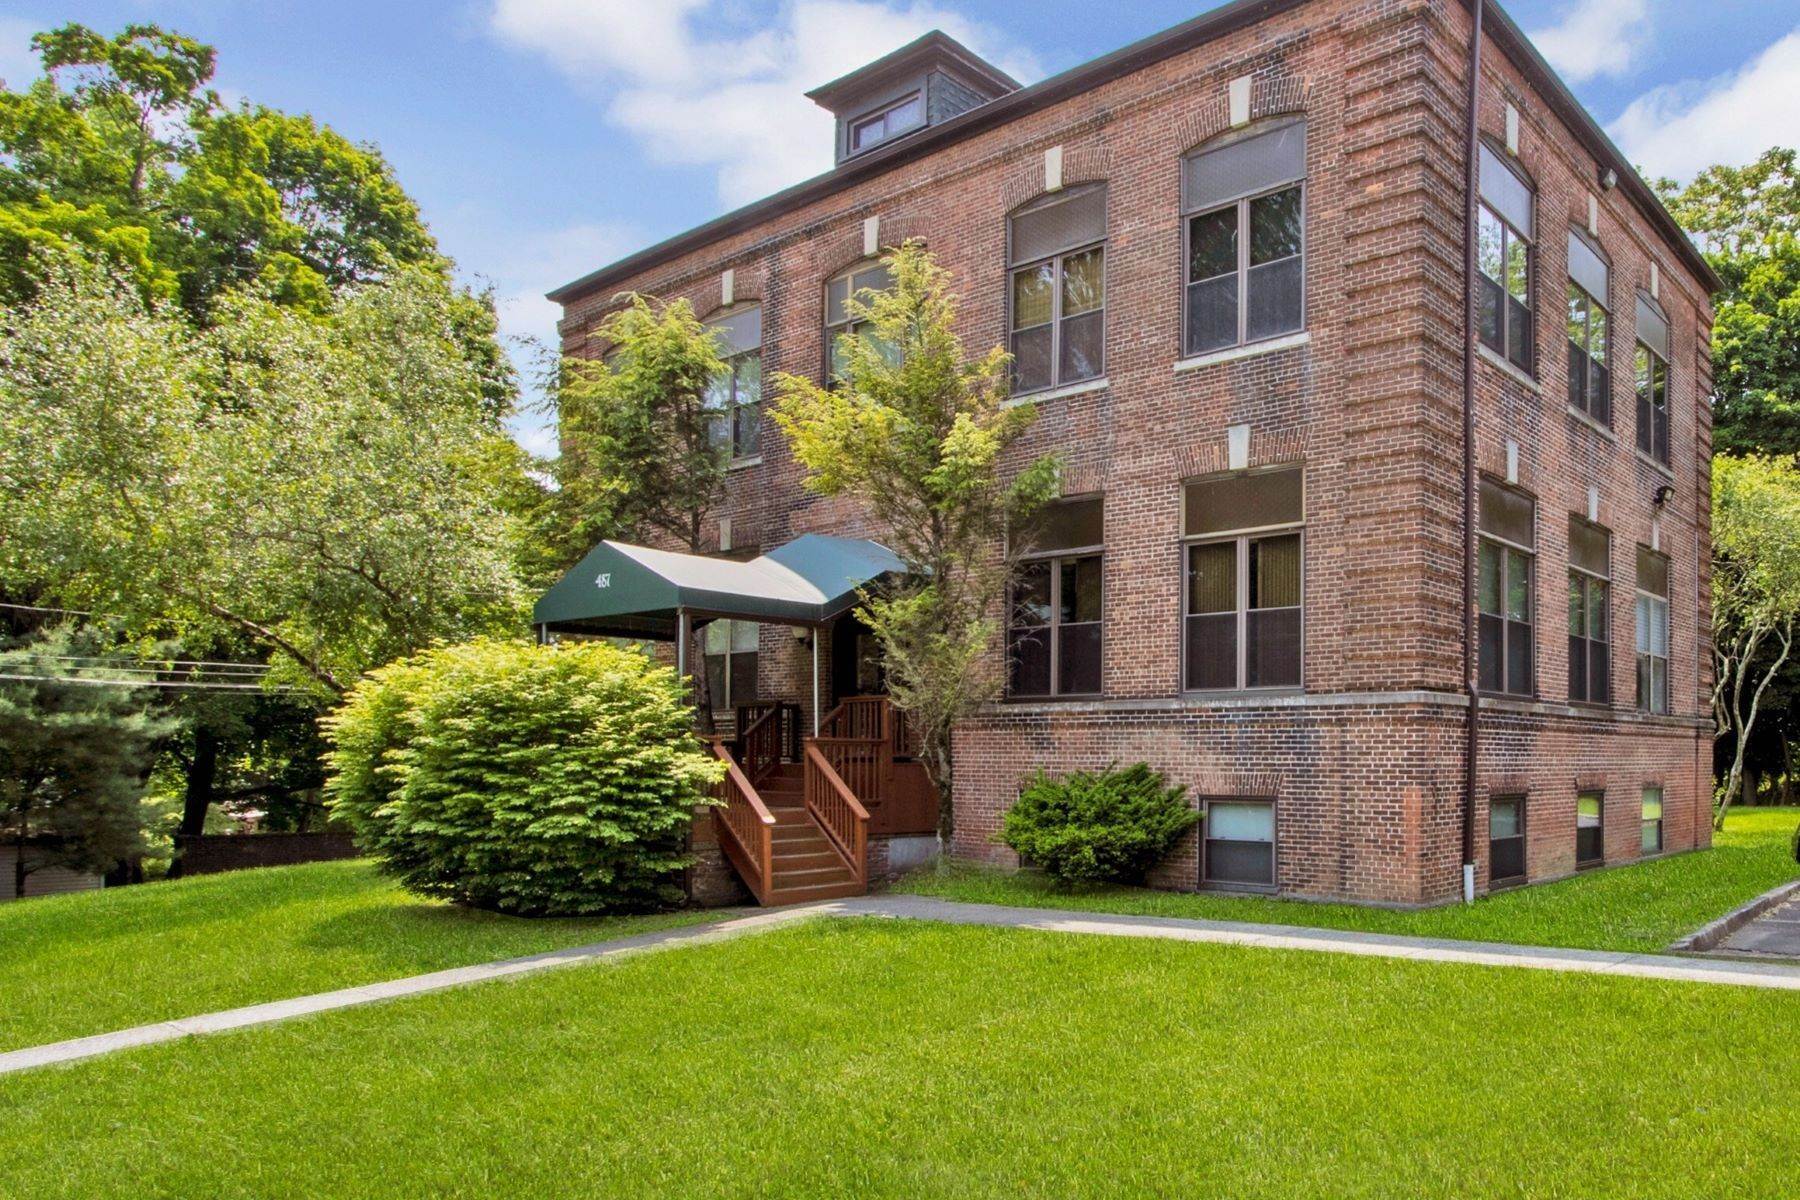 Condominiums for Sale at 1 Bedroom Condo in Converted 1890 Schoolhouse 487 South Avenue, Unit #4 Beacon, New York 12508 United States